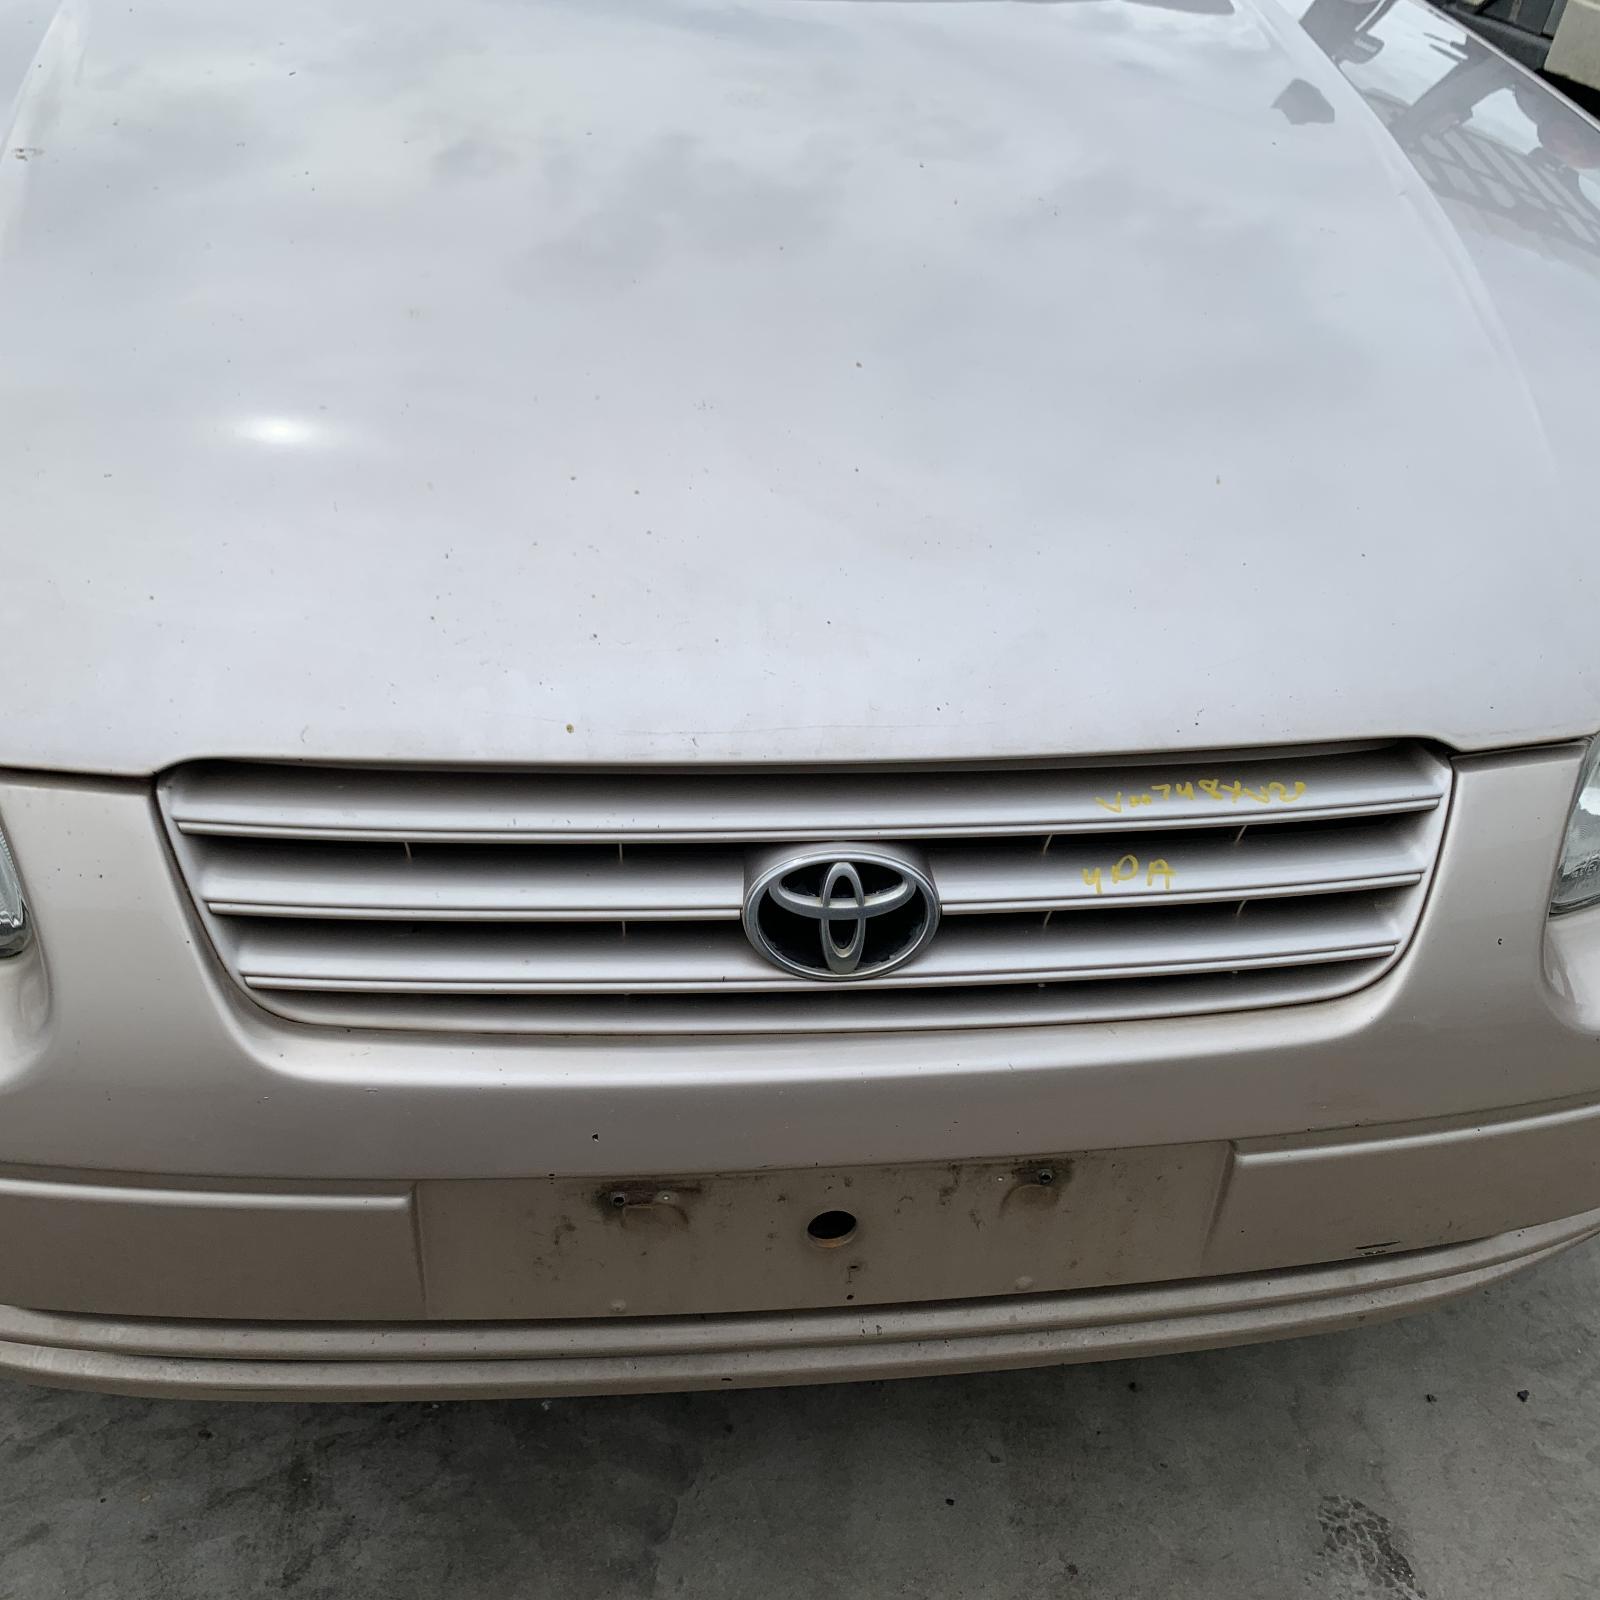 TOYOTA CAMRY, Grille, RADIATOR GRILLE, SK20, COLOUR CODED, 08/97-09/00